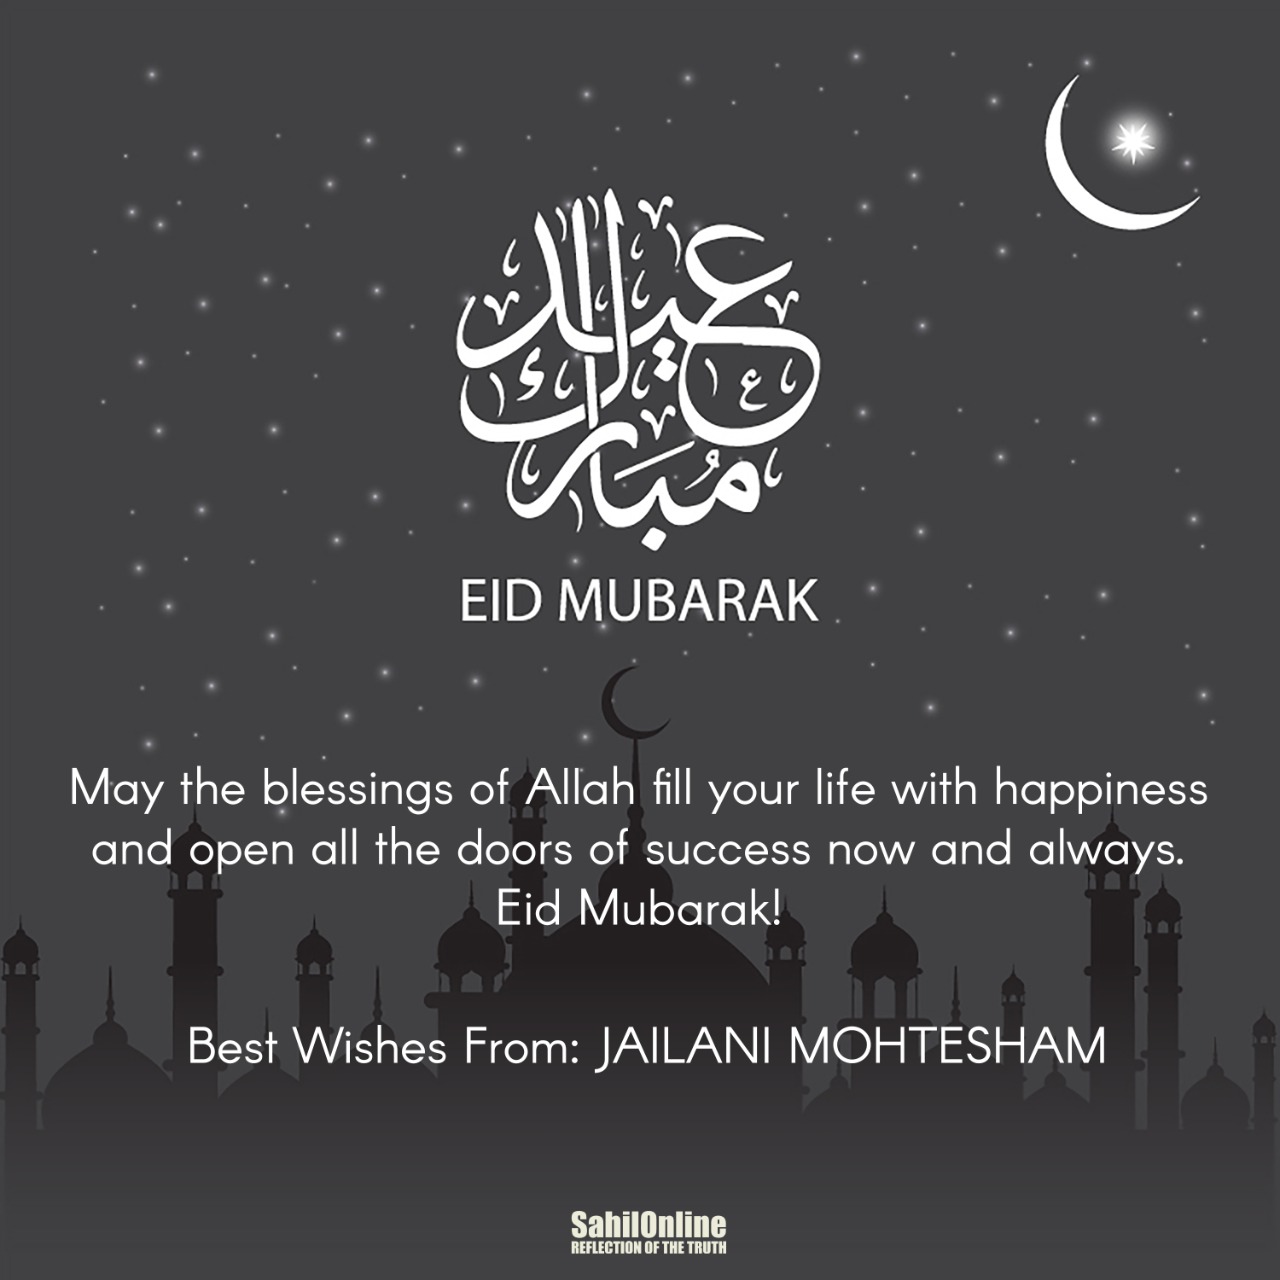 Different personalities and establishments wish Muslims on Eid ...